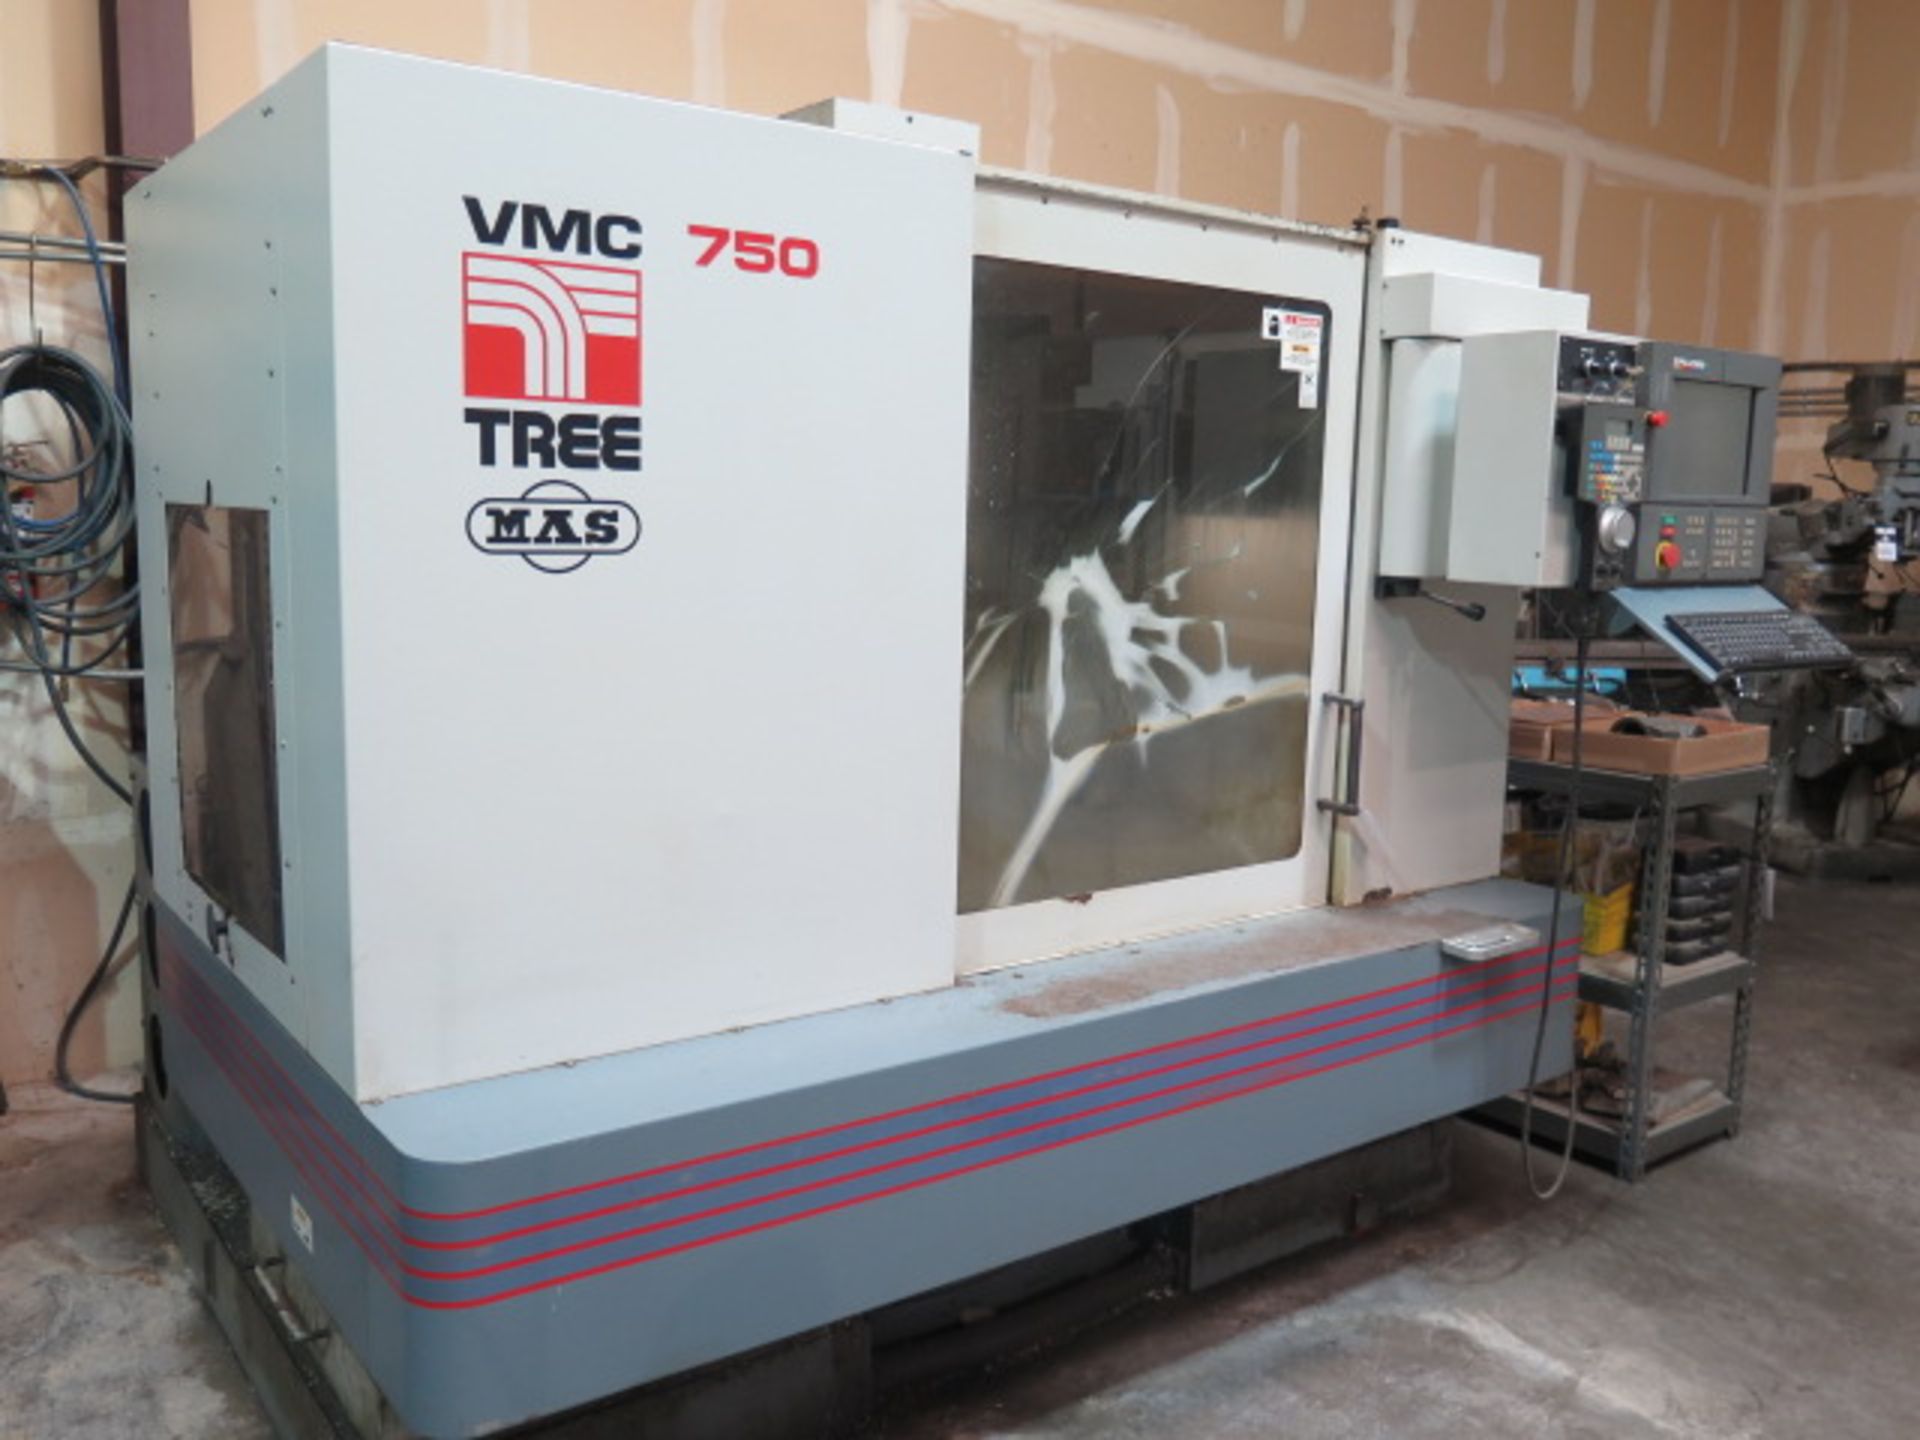 Tree / MAS VMC750 CNC Vertical Machining Center s/n 985961201 w/ Tree PC-2100 Controls, SOLD AS IS - Image 2 of 16